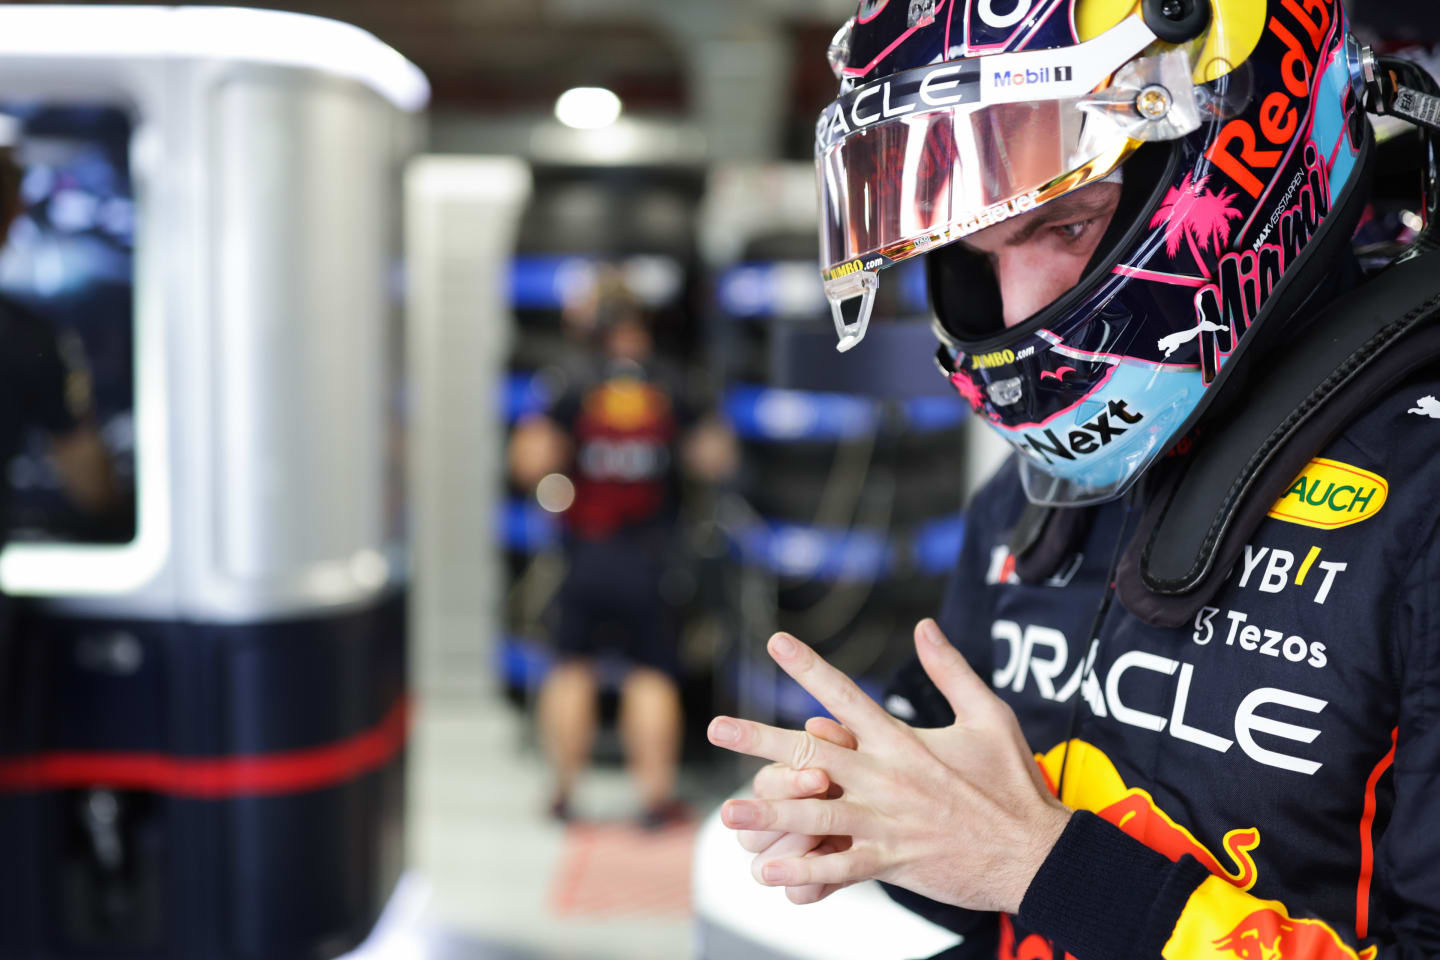 MIAMI, FLORIDA - MAY 07: Max Verstappen of the Netherlands and Oracle Red Bull Racing prepares to drive in the garage during qualifying ahead of the F1 Grand Prix of Miami at the Miami International Autodrome on May 07, 2022 in Miami, Florida. (Photo by Mark Thompson/Getty Images)